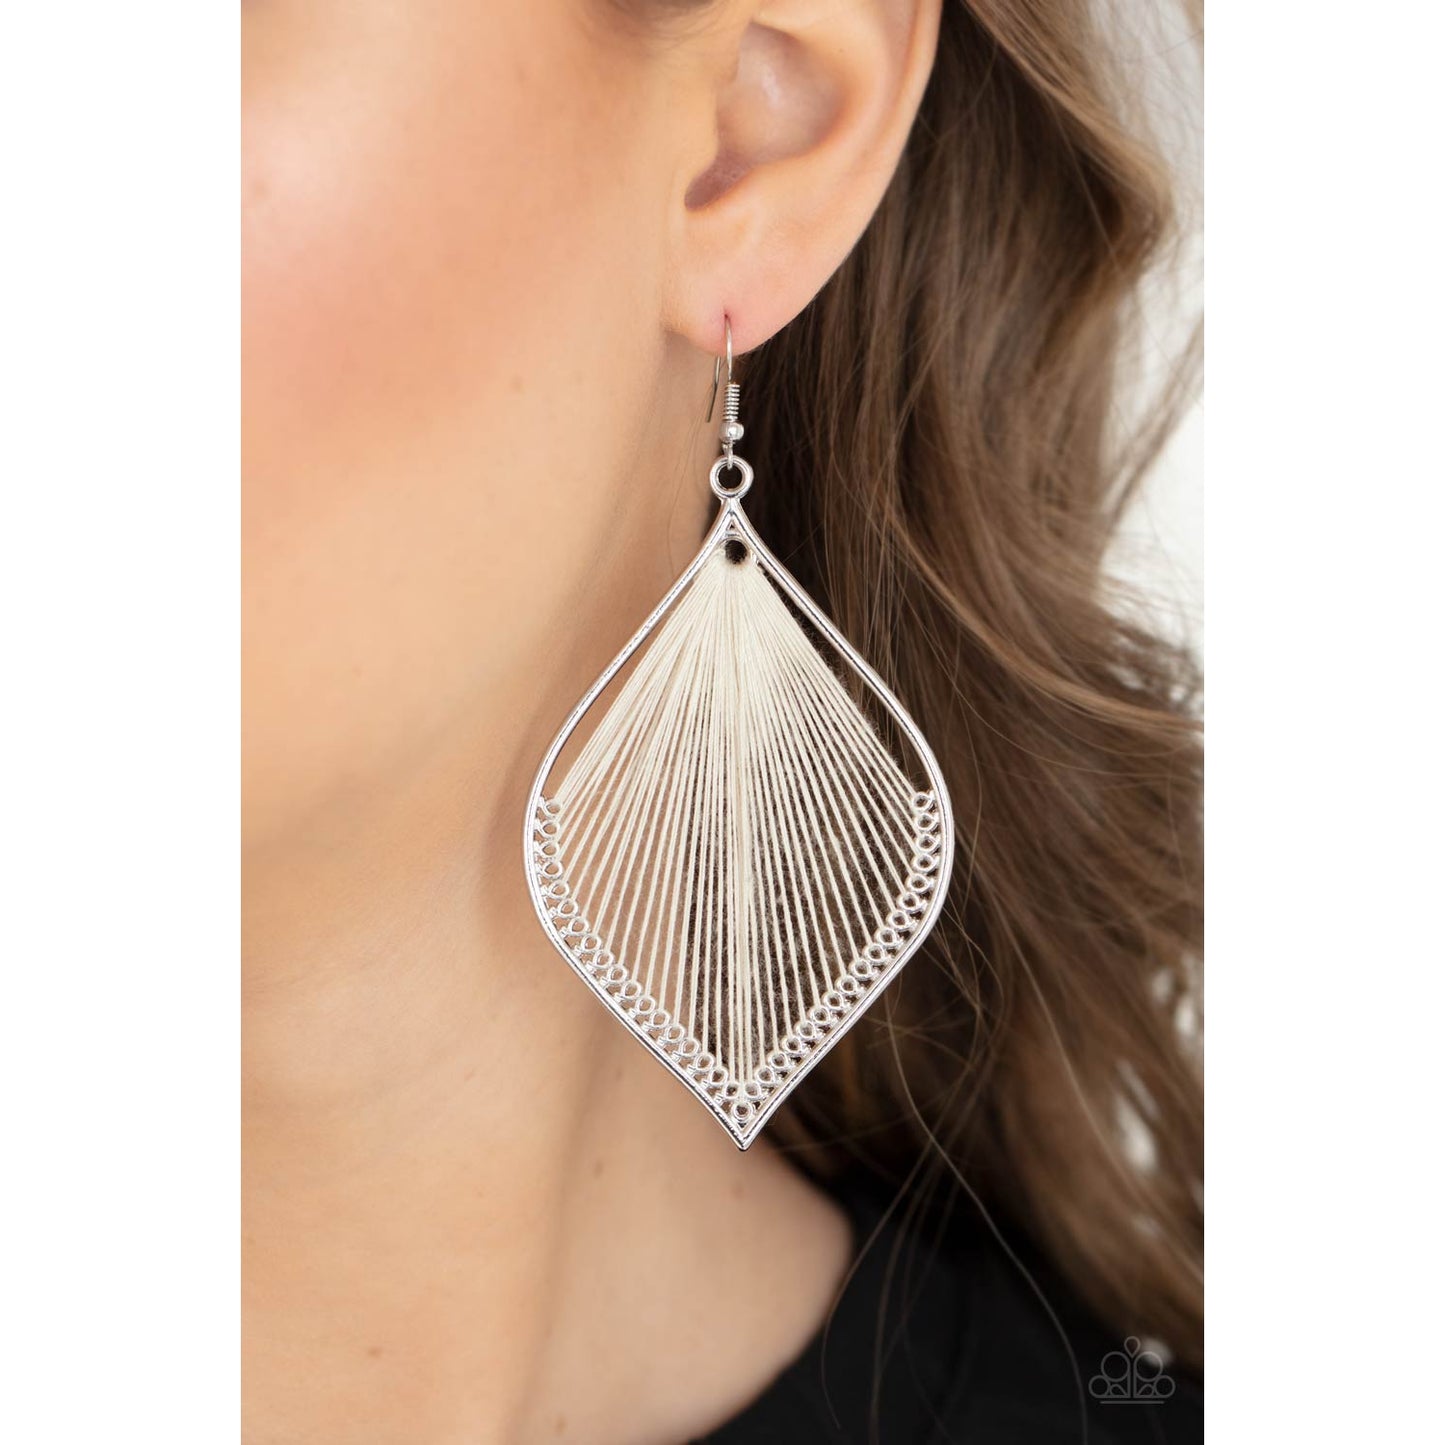 String Theory - White Earrings - Paparazzi Accessories - GlaMarous Titi Jewels